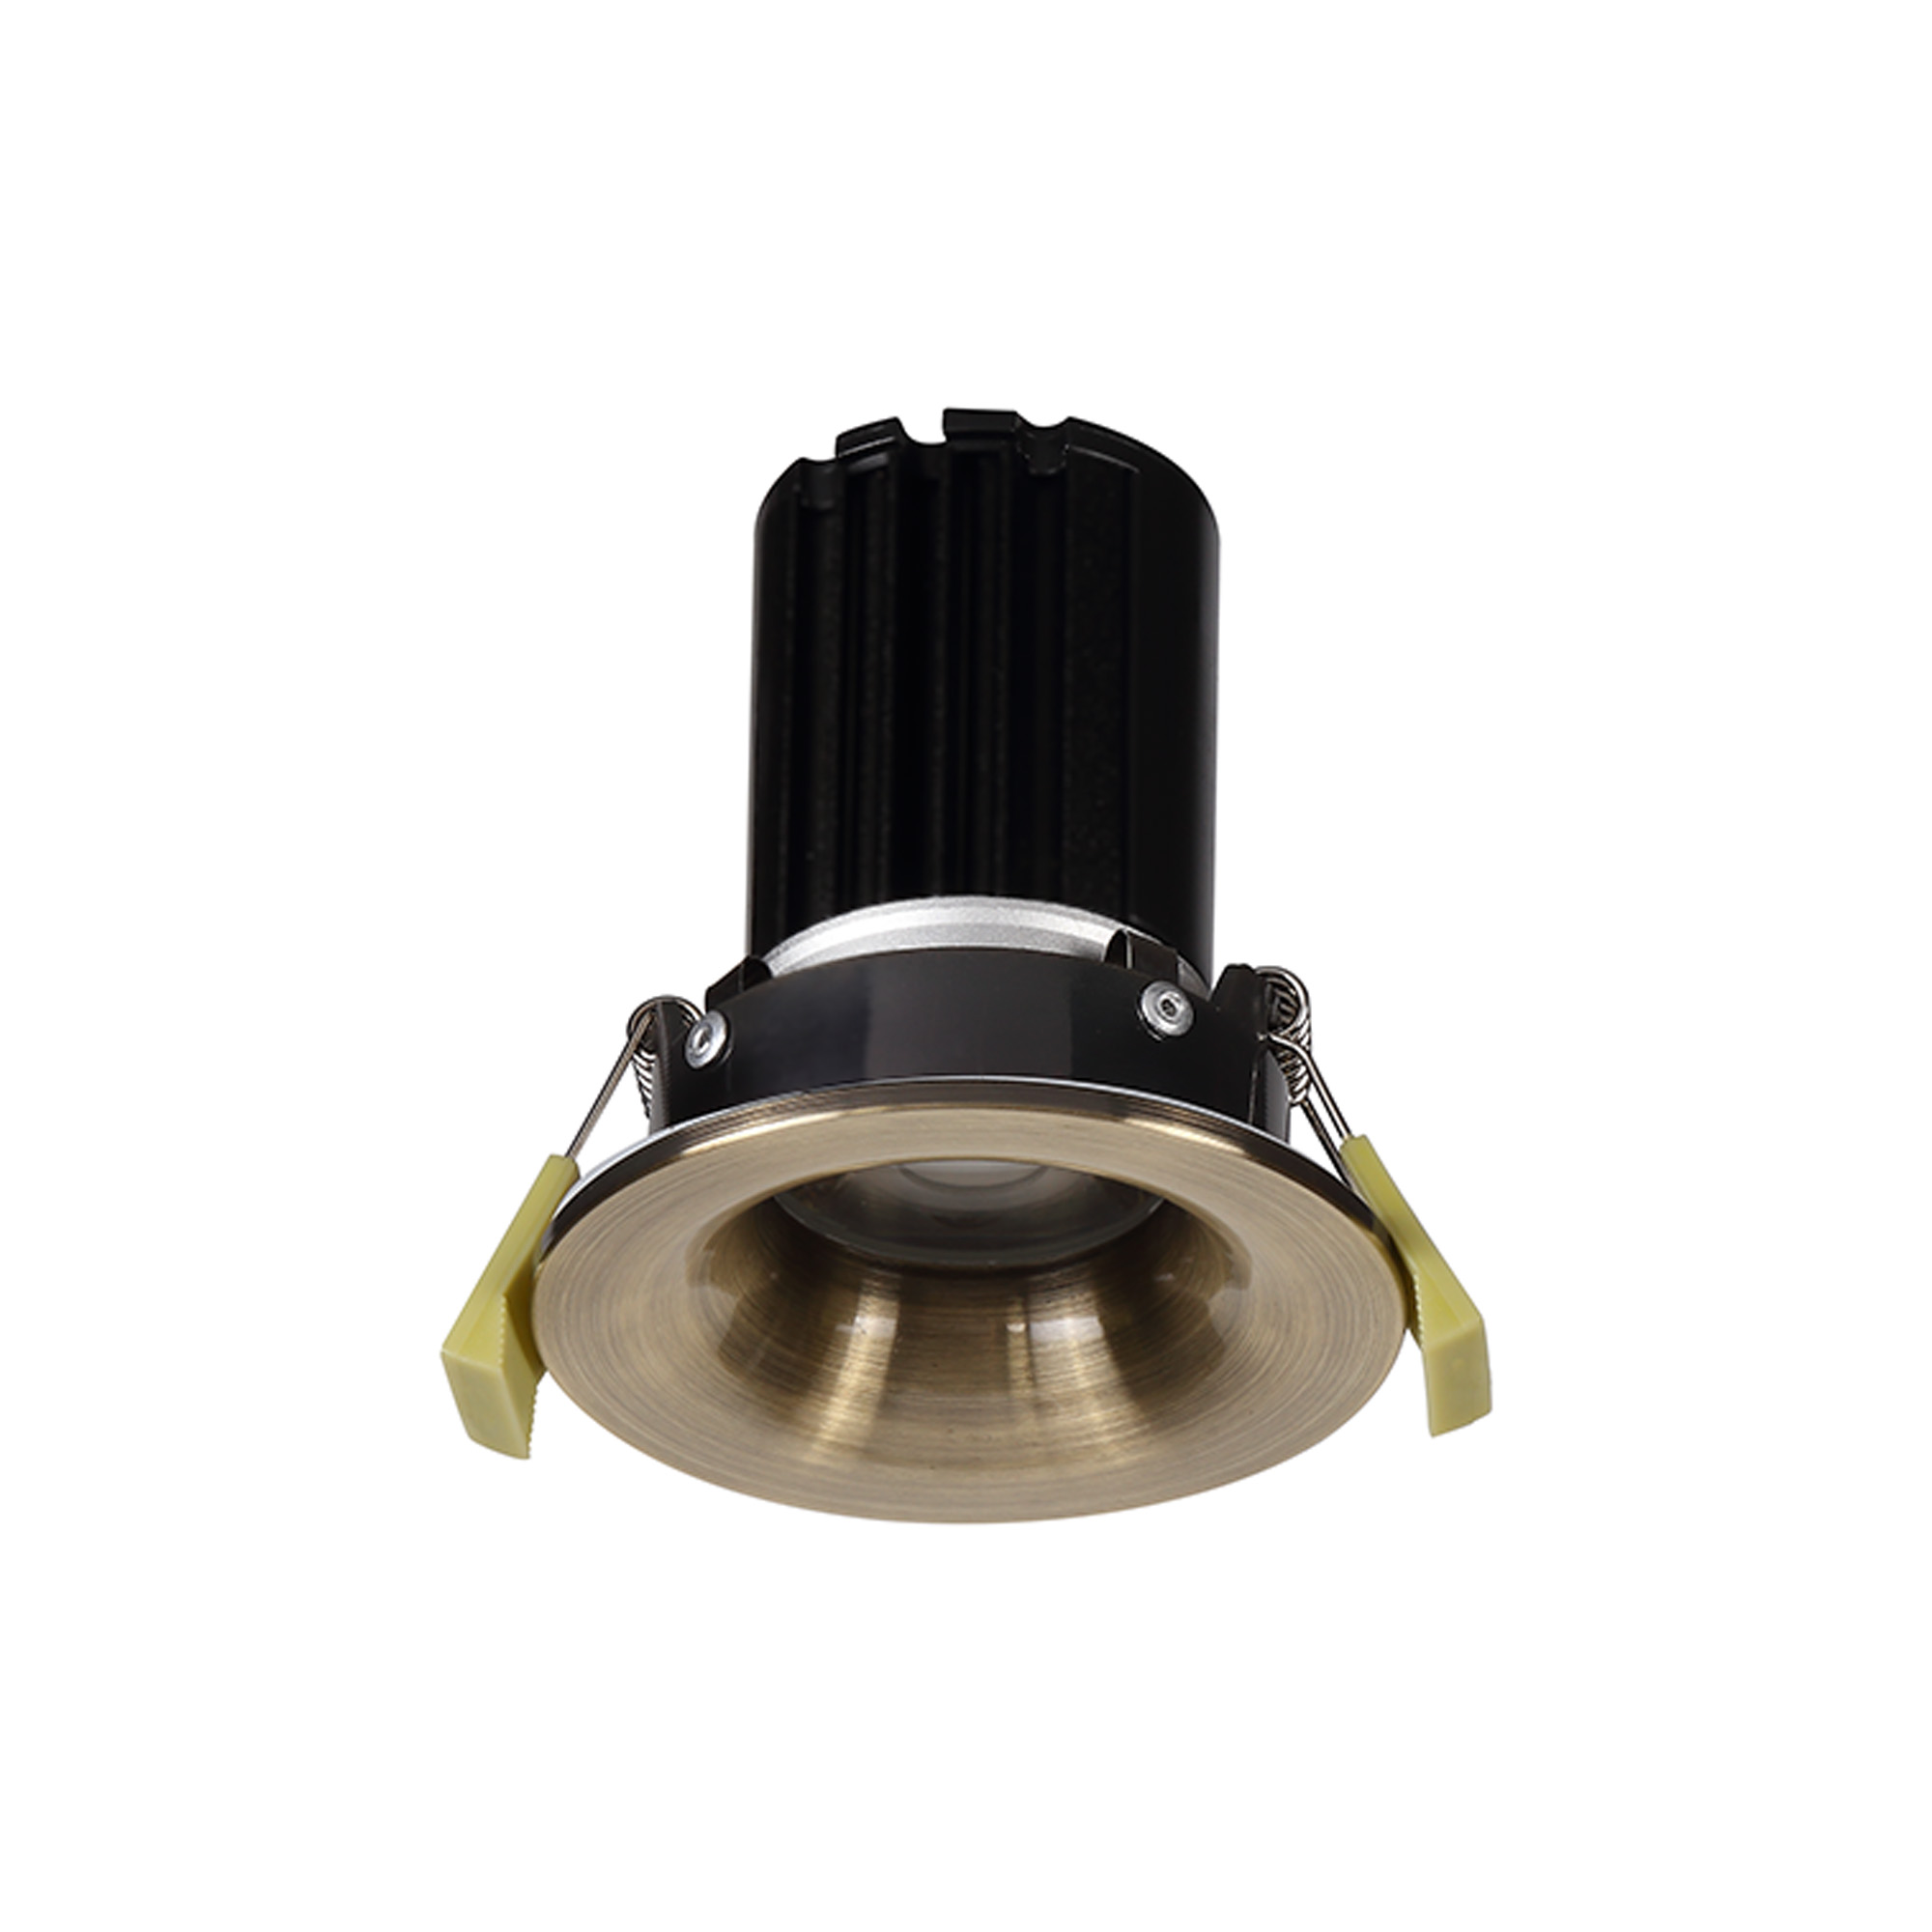 DM201554  Bruve 12 Tridonic powered 12W 2700K 1200lm 12° LED Engine;350mA ; CRI>90 LED Engine Antique Brass Fixed Round Recessed Downlight; Inner Glass cover; IP65